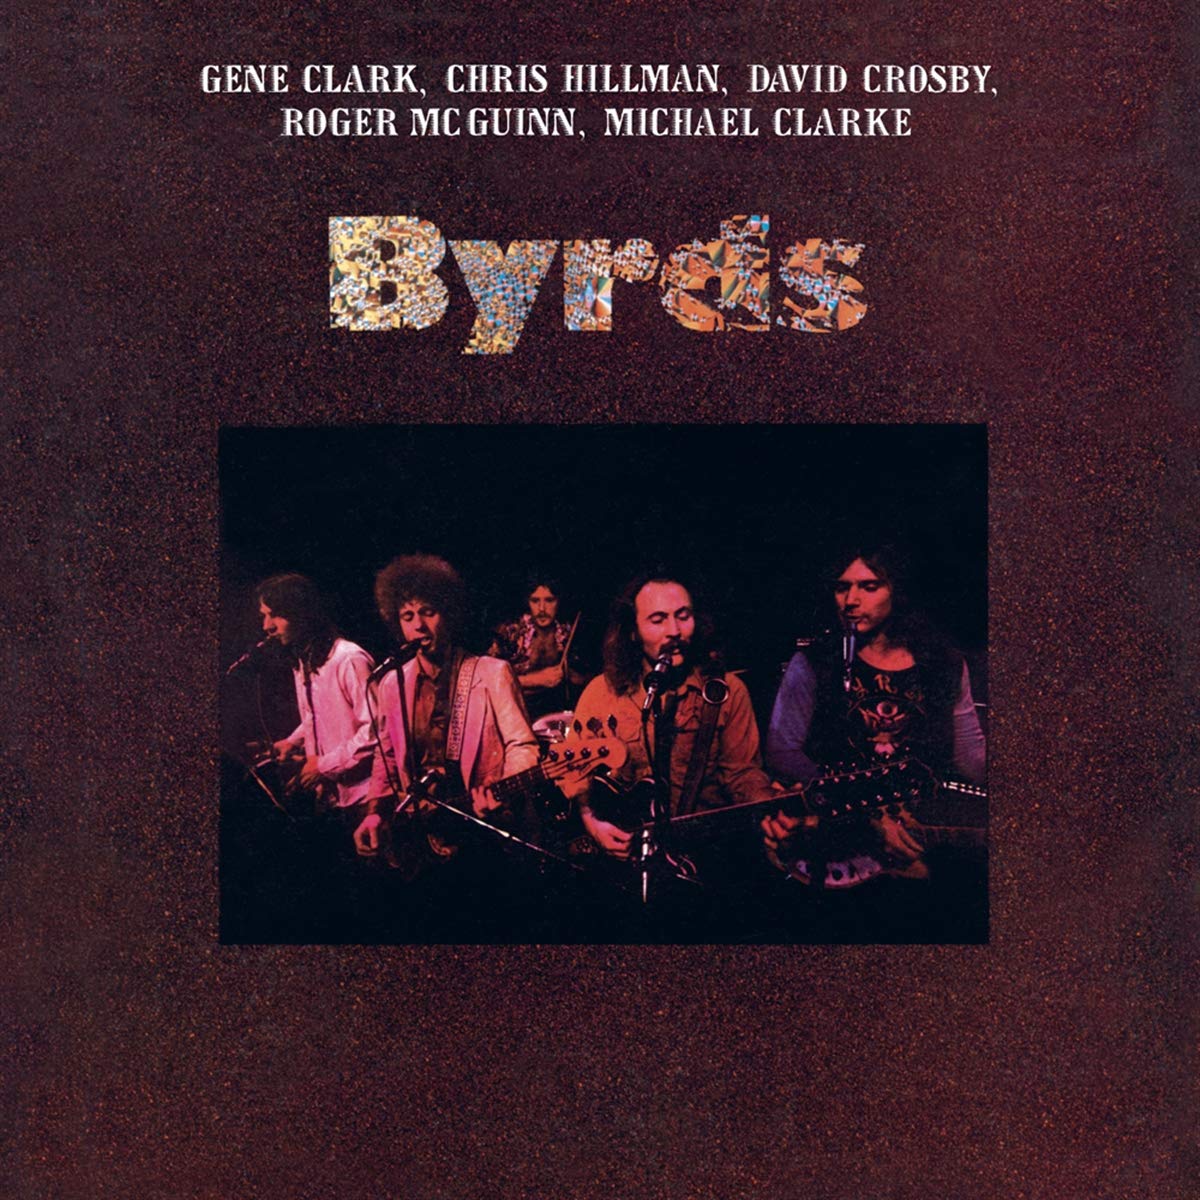 The Byrds - 1973   

The twelfth and final album by The Byrds.  It was recorded as the centerpiece of a reunion among the five original band members: Roger McGuinn, Gene Clark, David Crosby, Chris Hillman, and Michael Clarke.